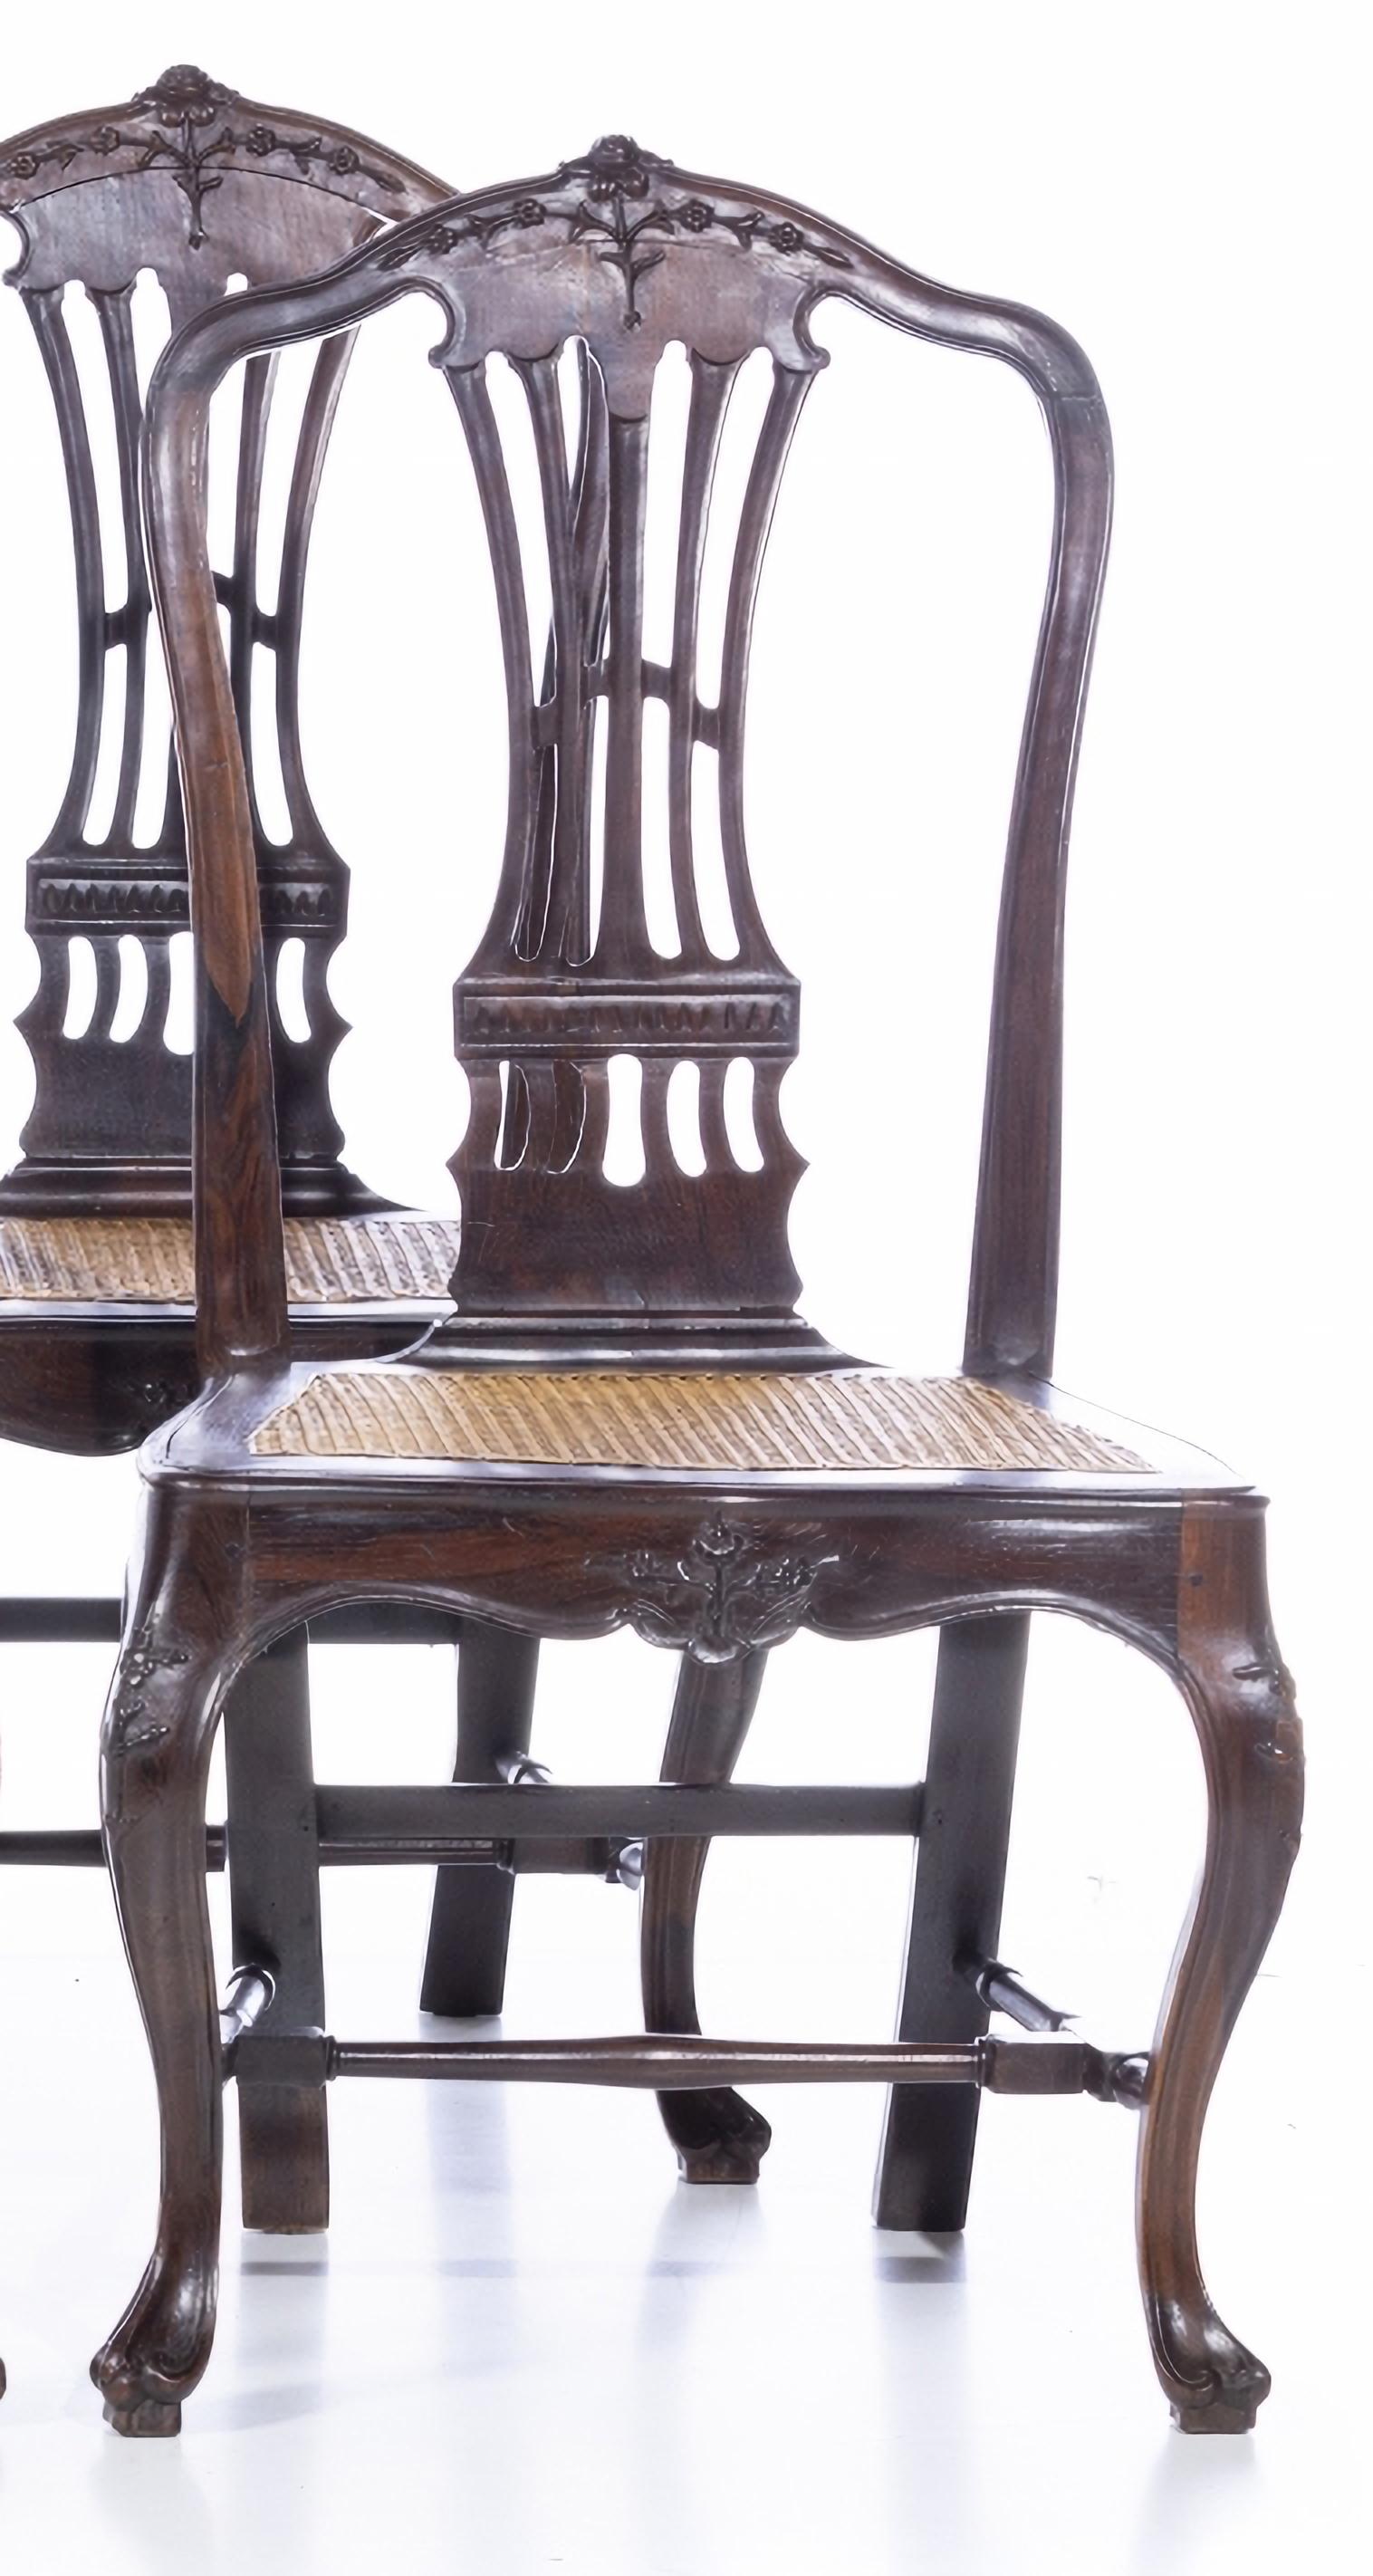 Portuguese SET OF SIX PORTUGUESE CHAIRS  18th Century in Brazilian Rosewood